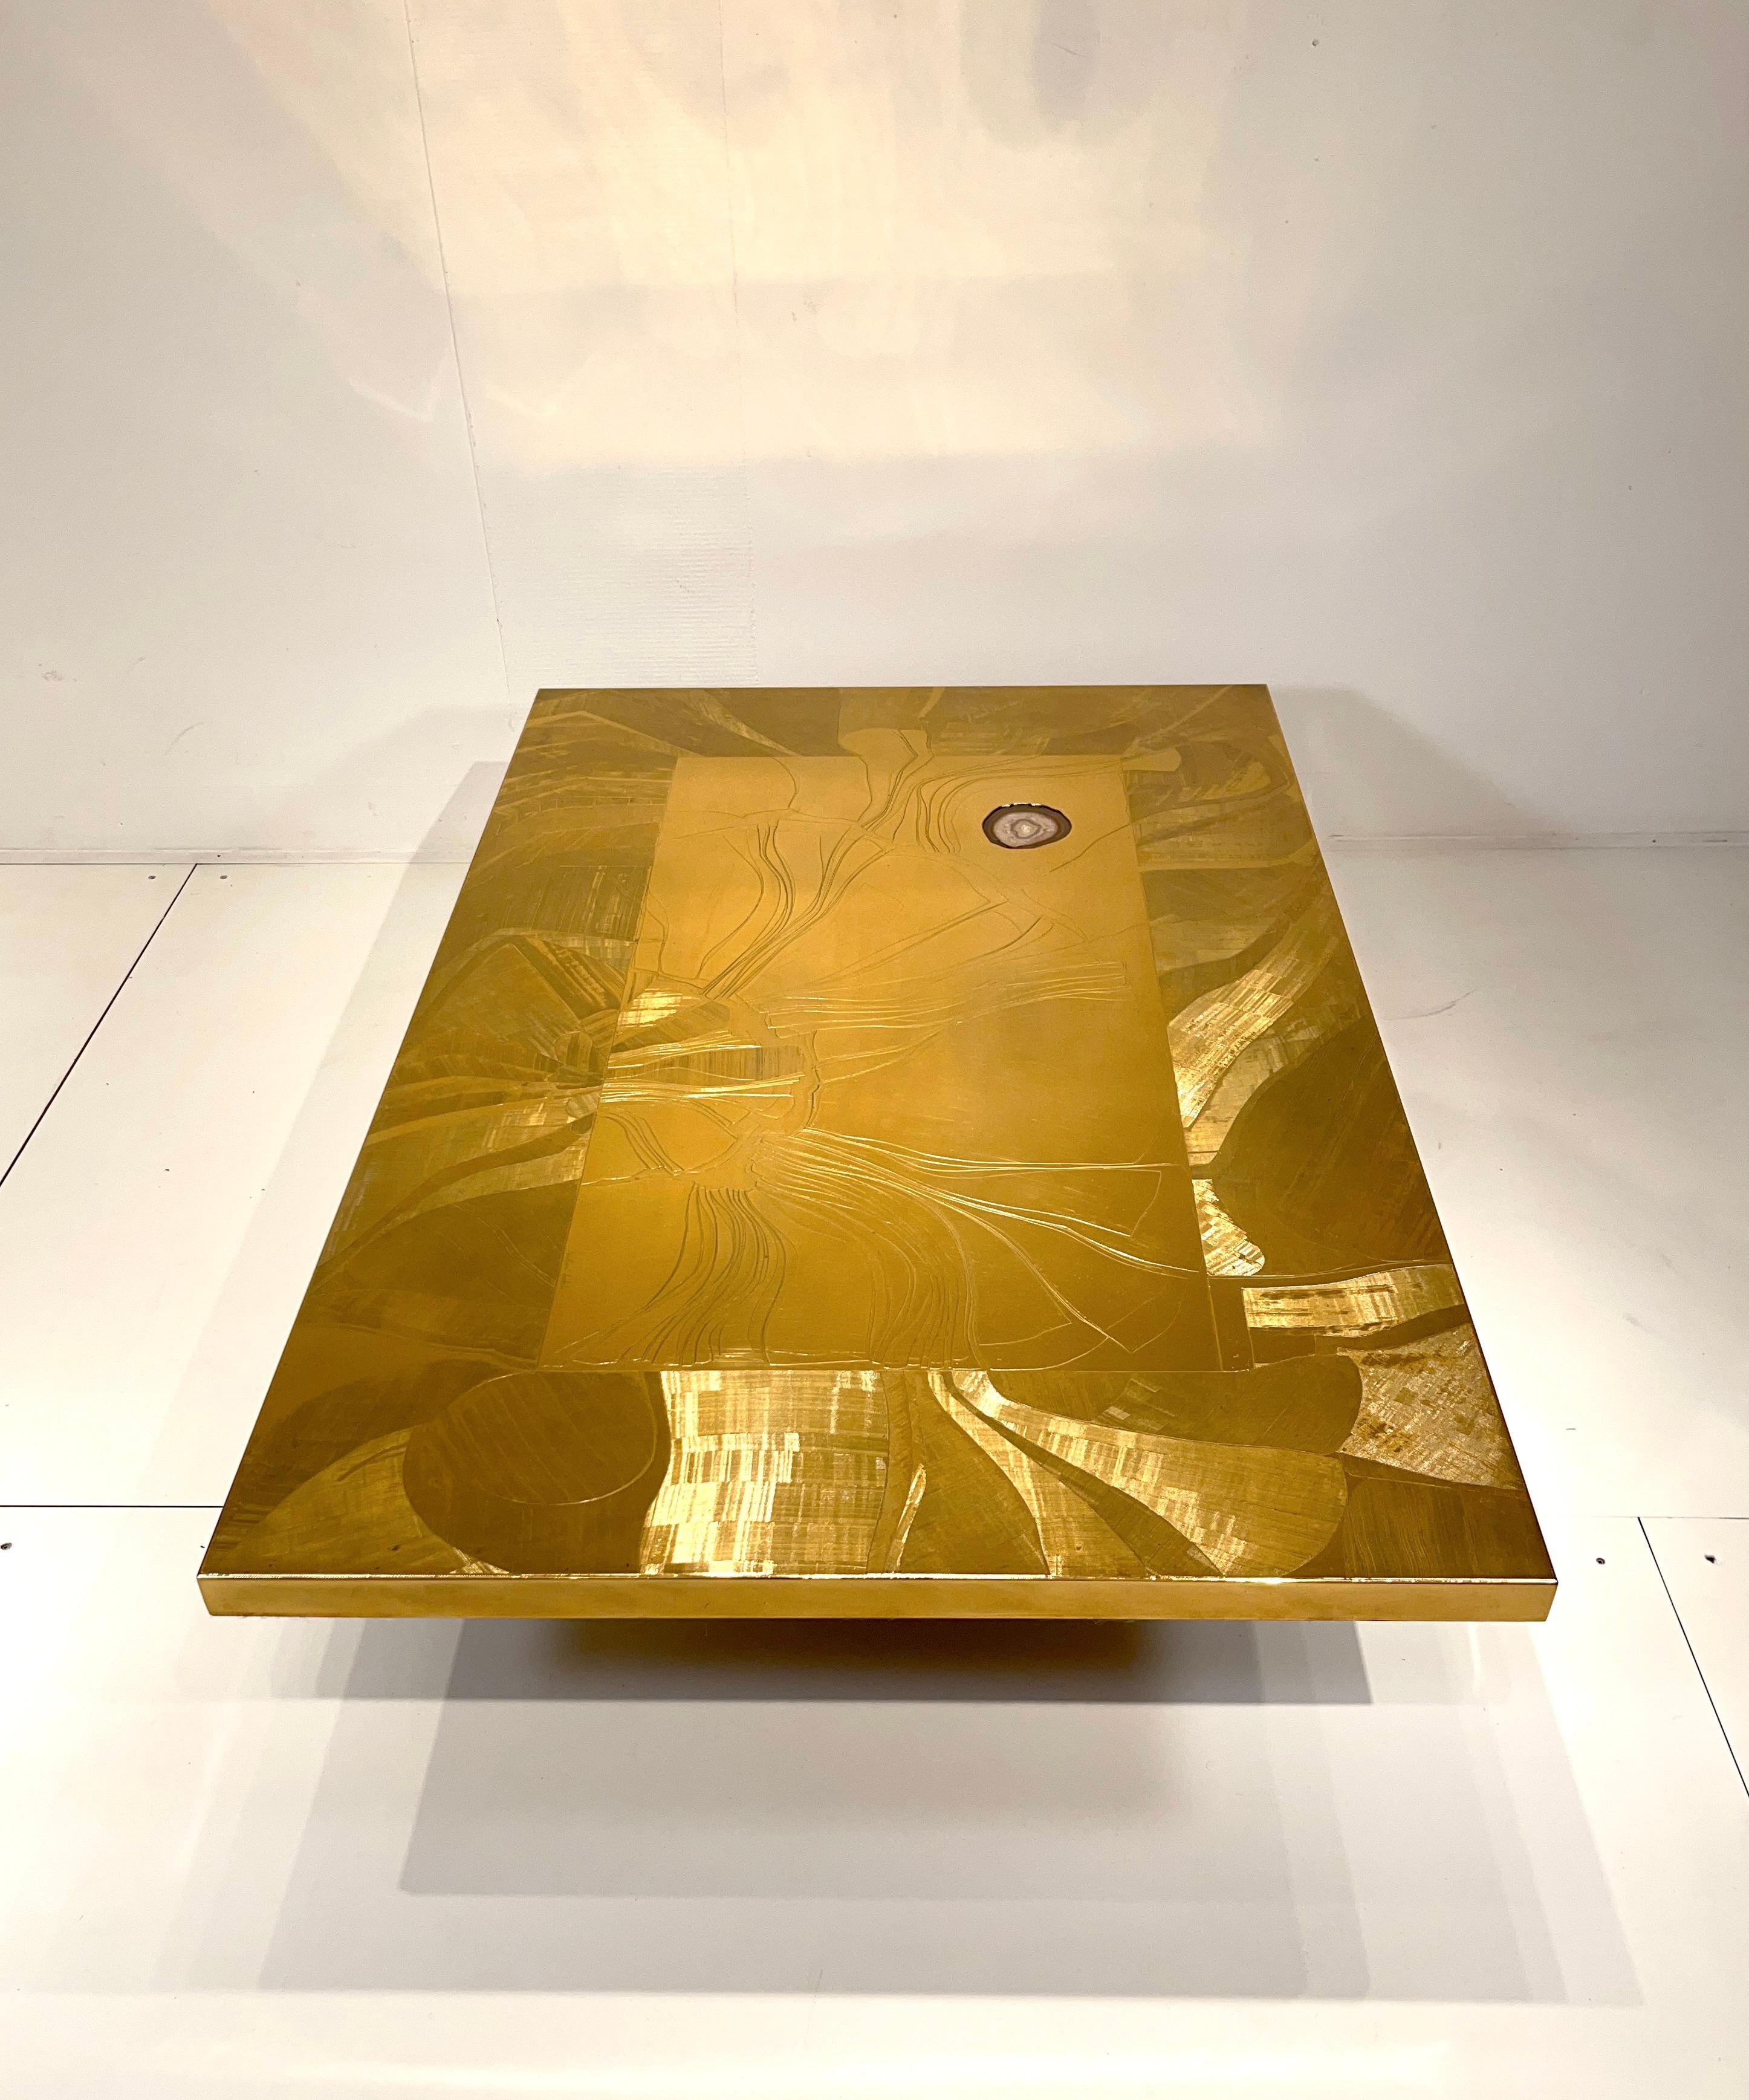 Christian Krekels Etched Brass Coffee Table Inlaid Agate, circa 1970 For Sale 2